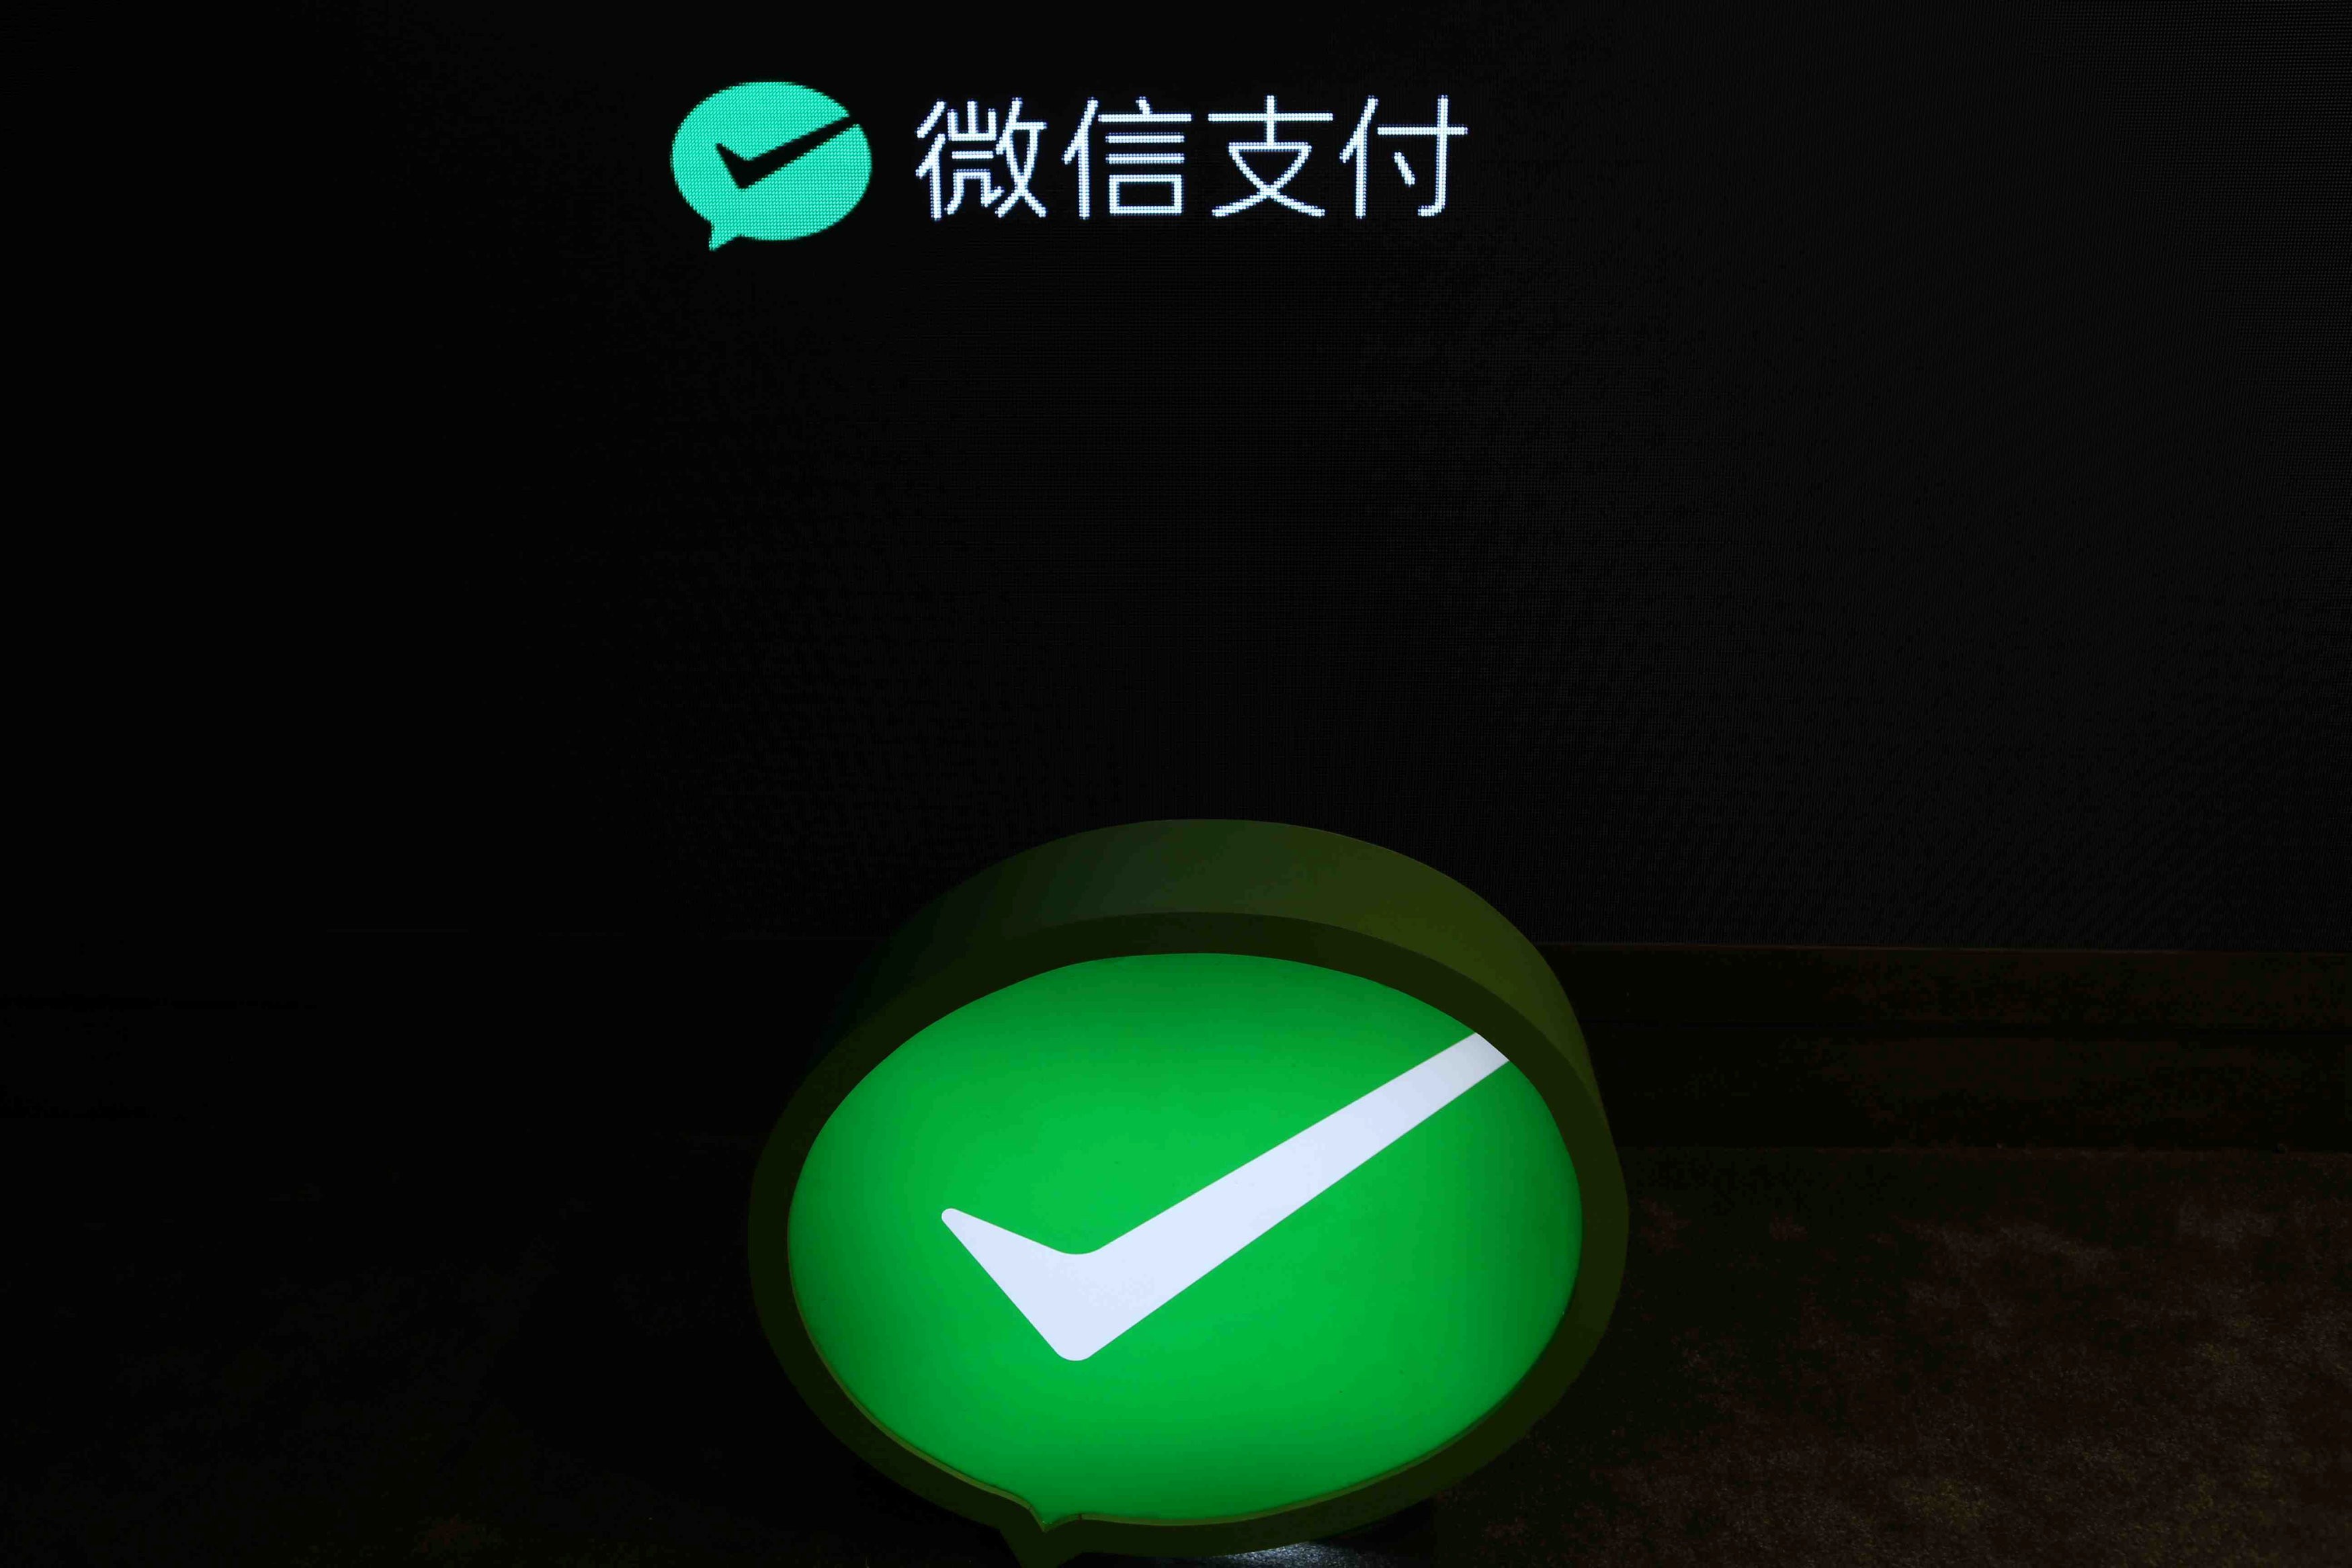 WeChat Pay says it will be difficult to develop local wallets for overseas customers